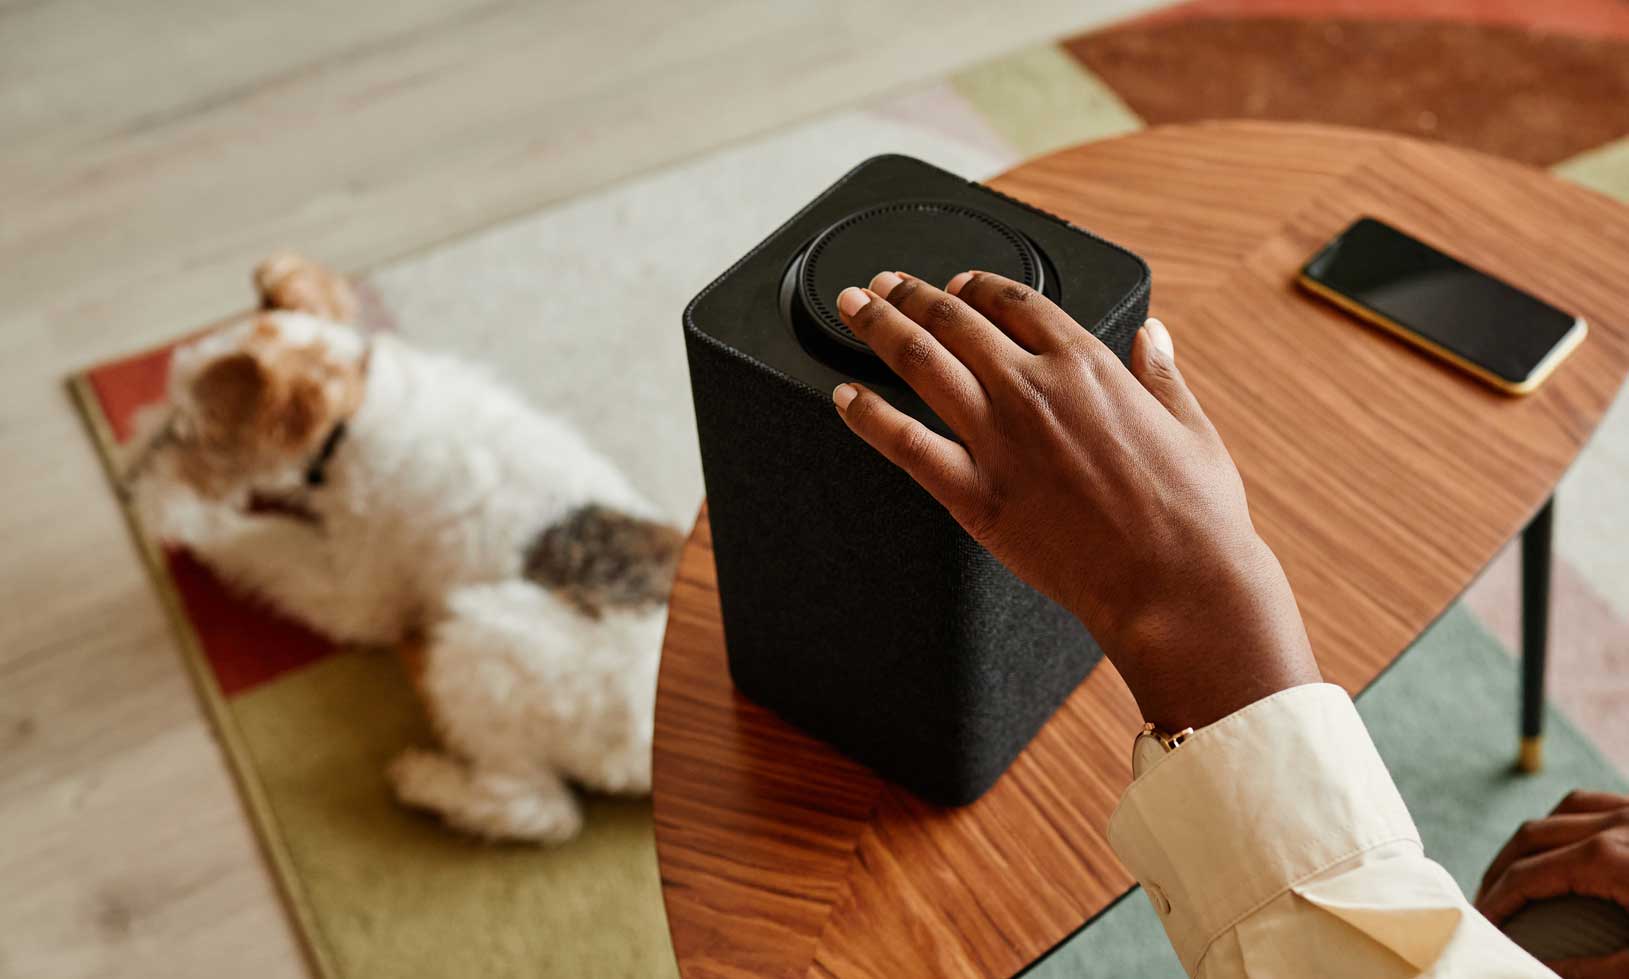 calming music for dogs: playing music on speaker dog in background